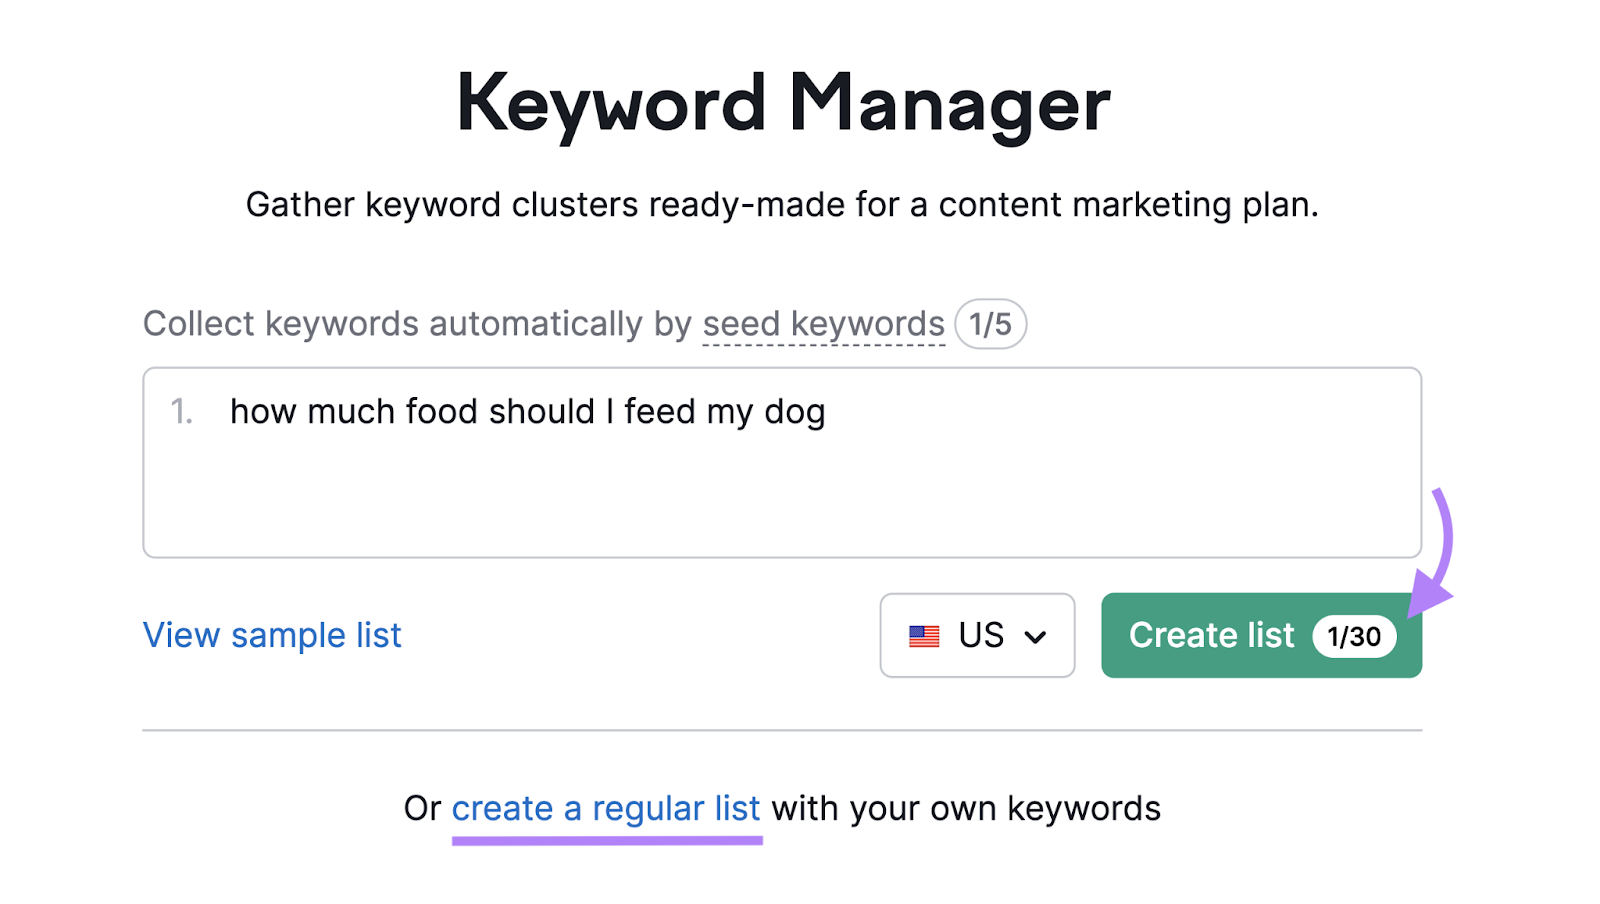 "how overmuch  nutrient  should I provender  my dog" keyword entered into the Keyword Manager tool